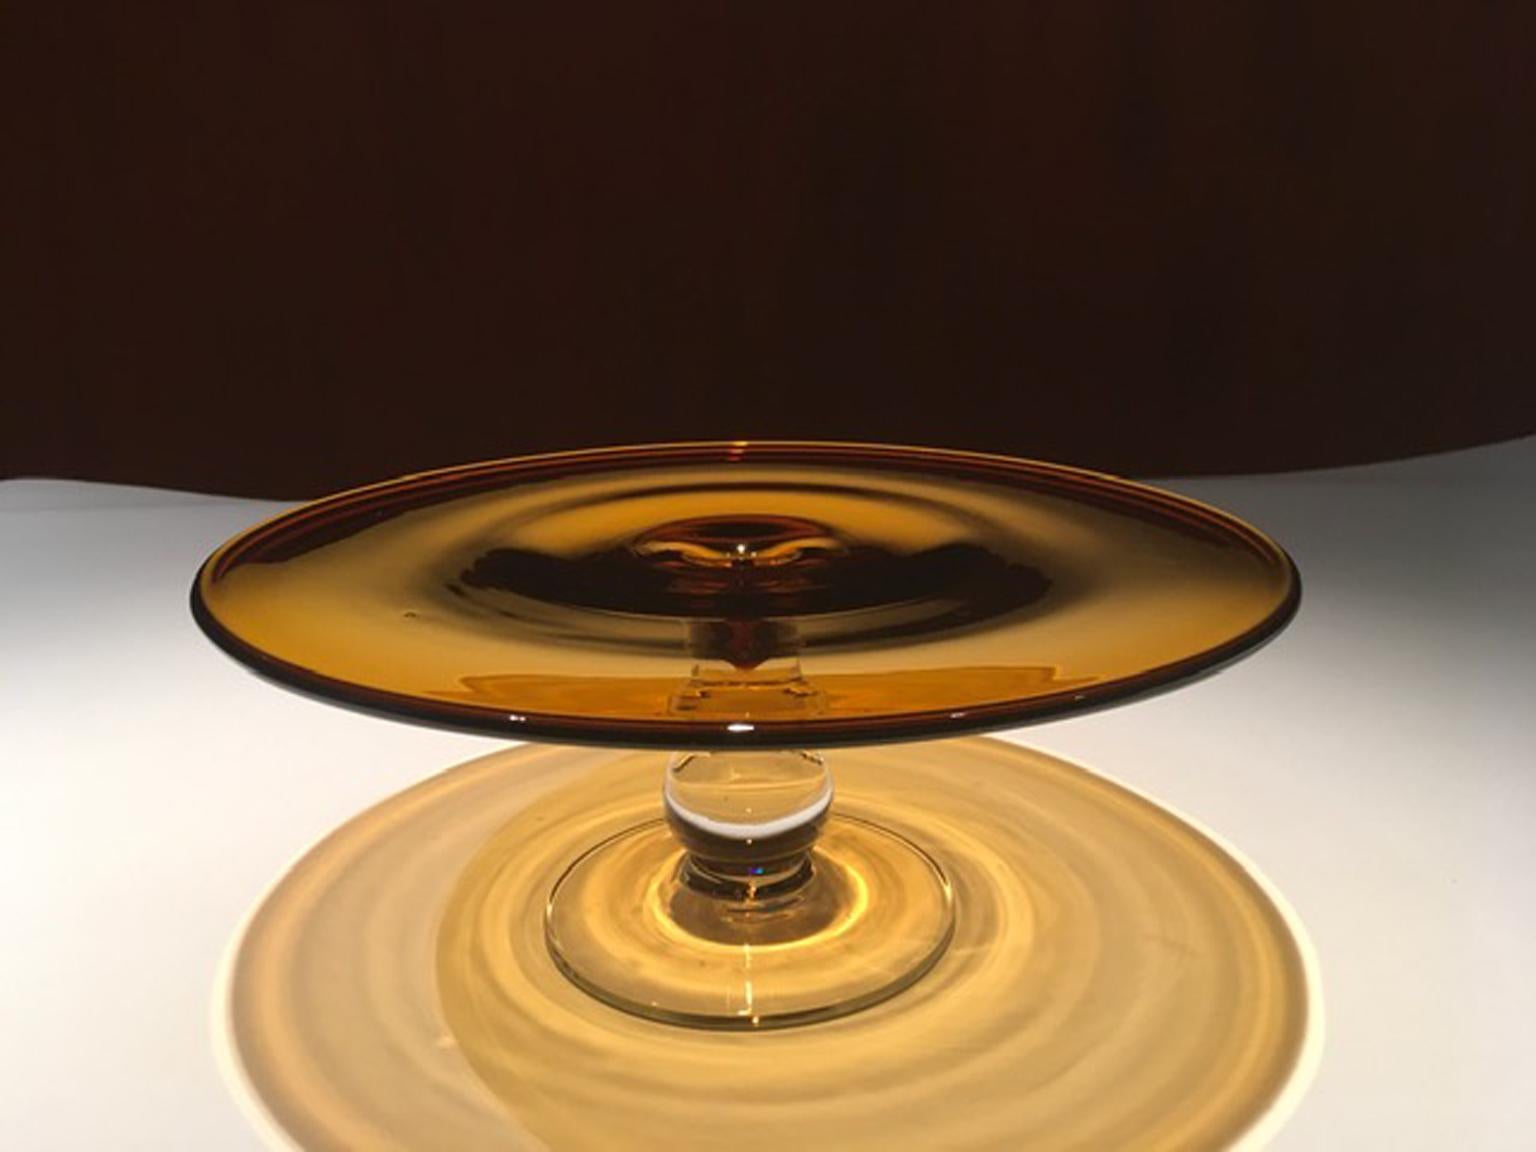 Elegant footed dish glass to serve cake or pastries. The amber color is very dense and bright.
Available by us on 1stdibs two gobelets of the same serie.